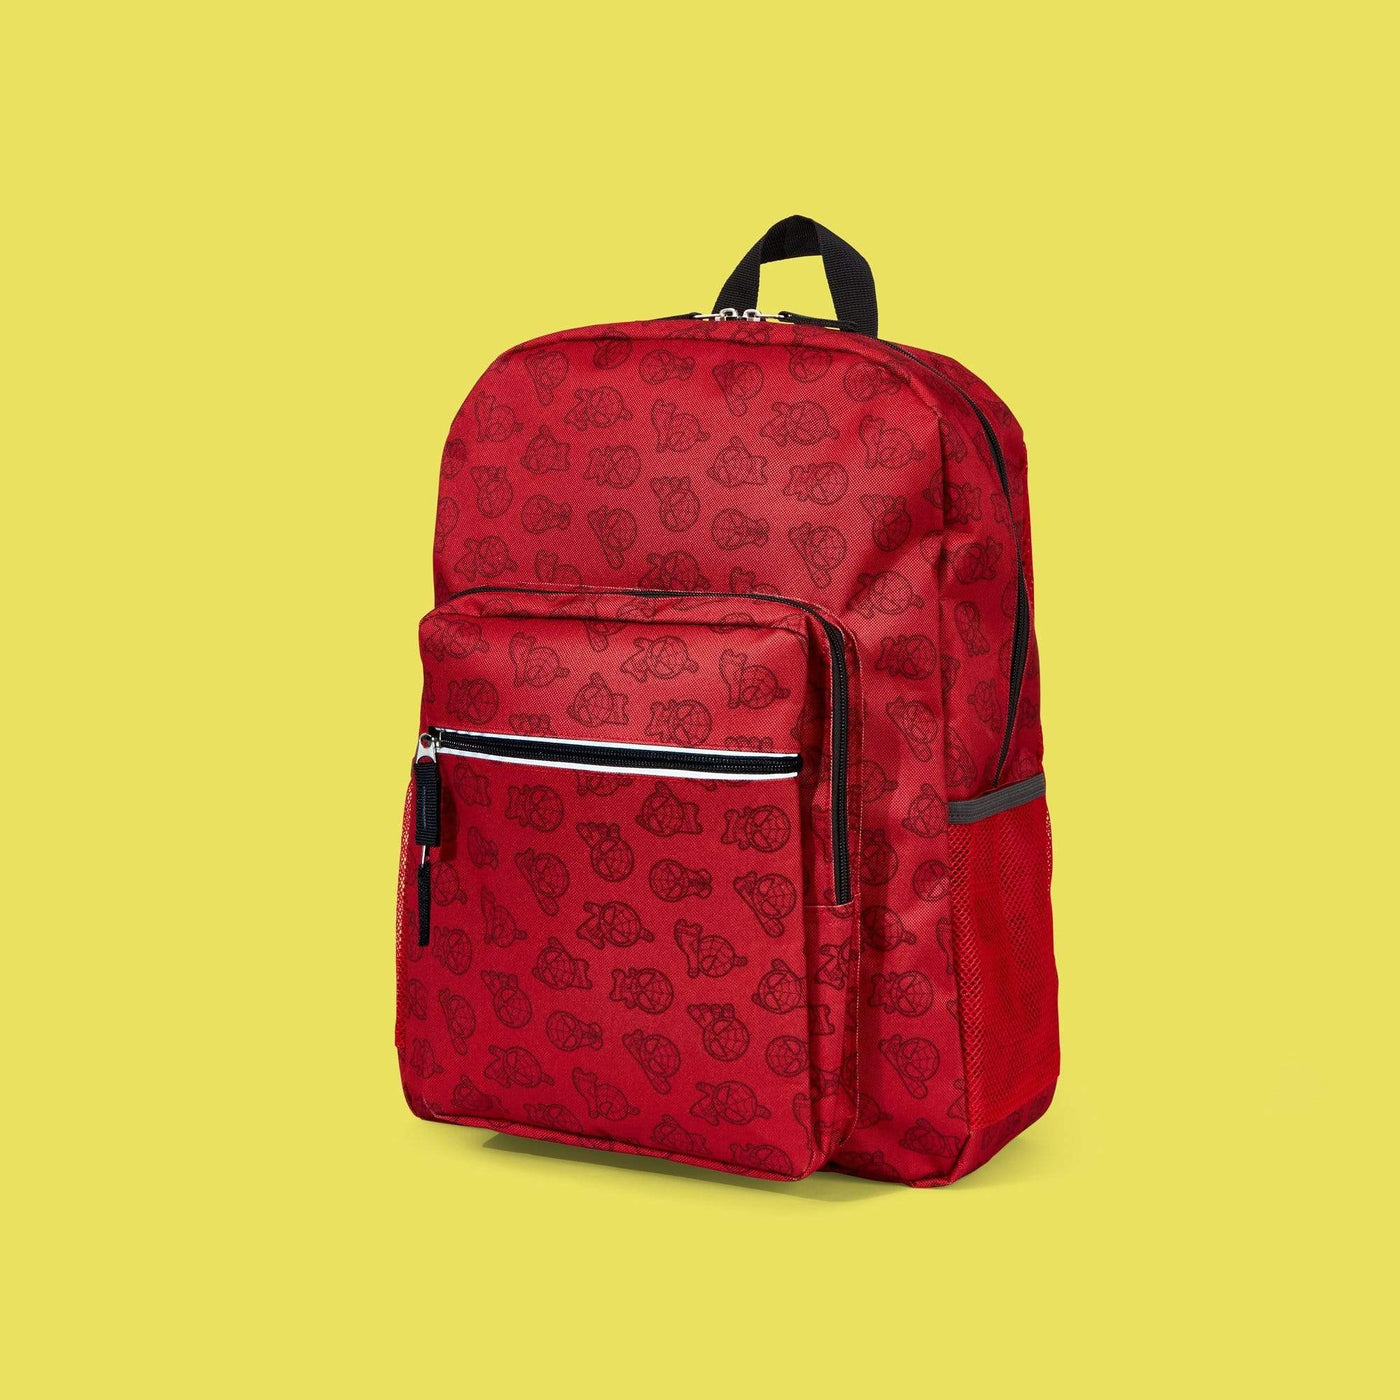 red backpack with Spider-Man Print with front zipper pocket.  Black handle and zipper detail